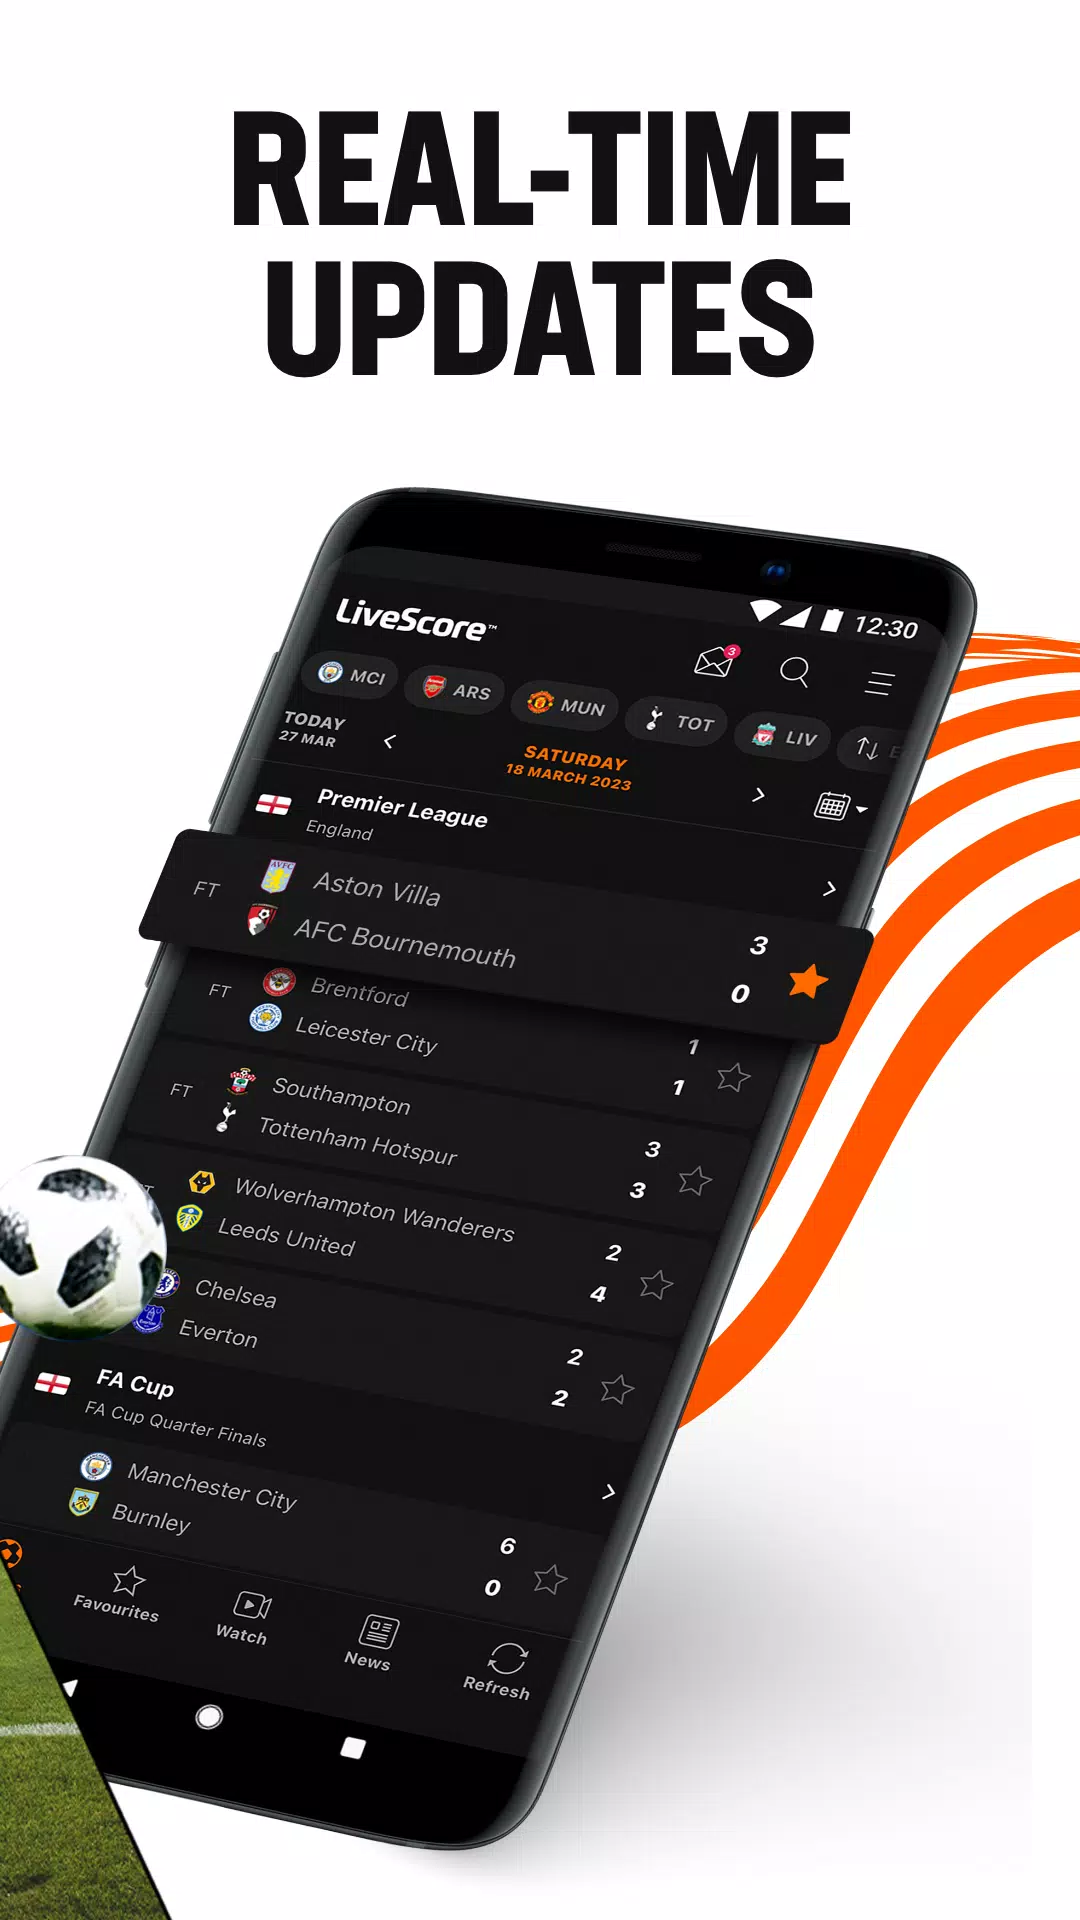 Live Soccer Scores and Sports Results - Opera - LiveScore